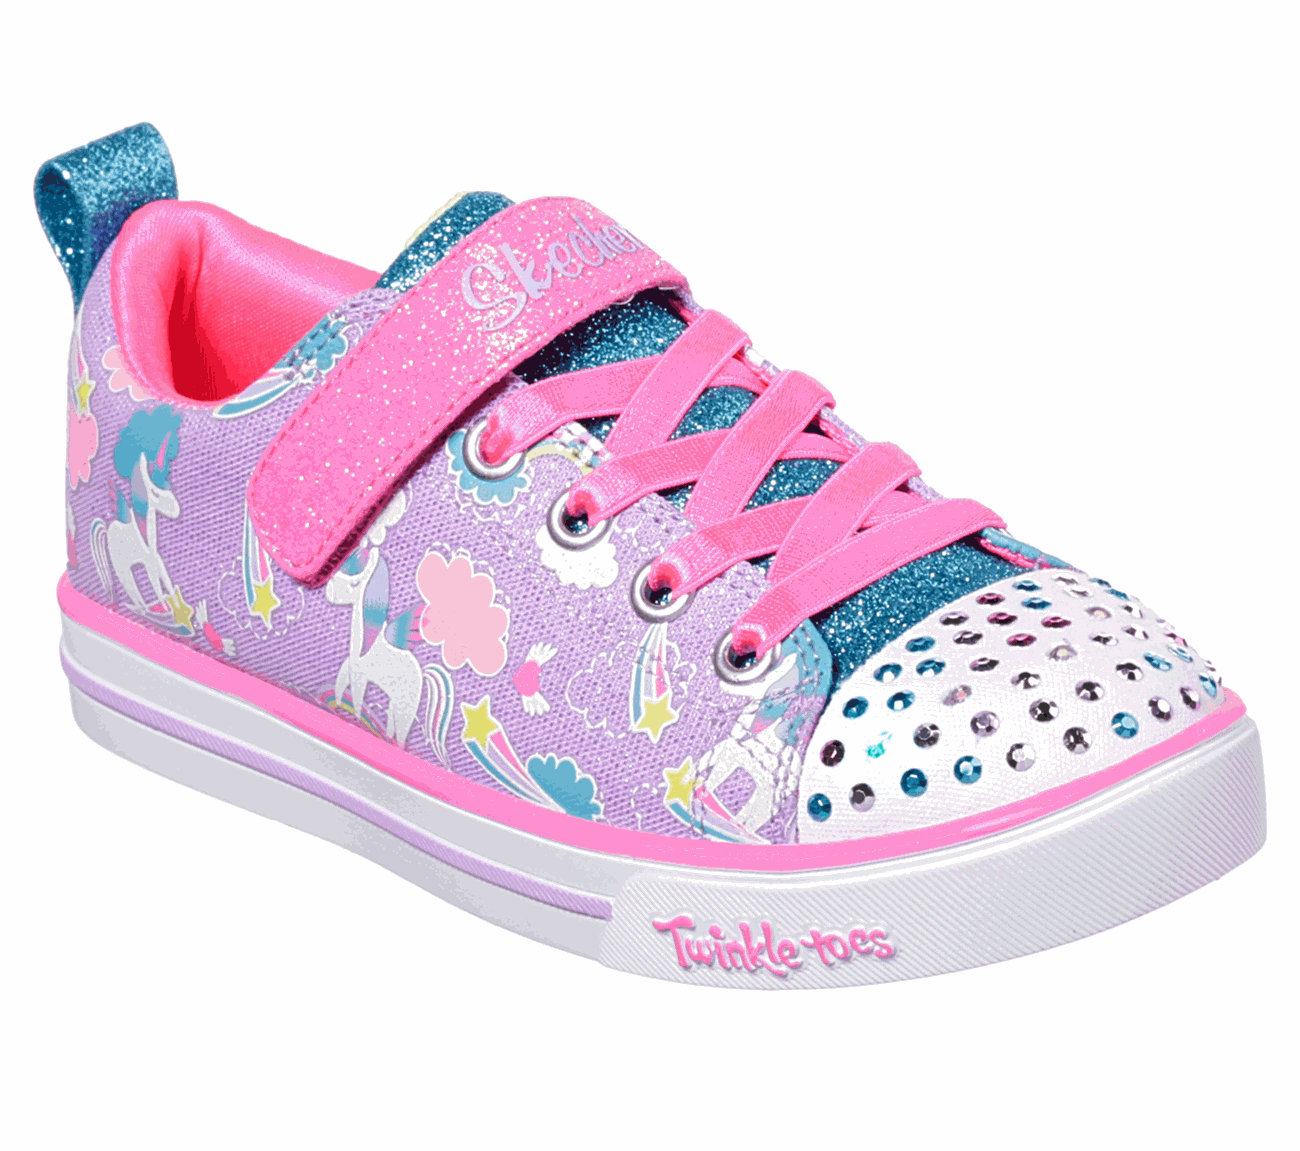 twinkle toes shoes for adults